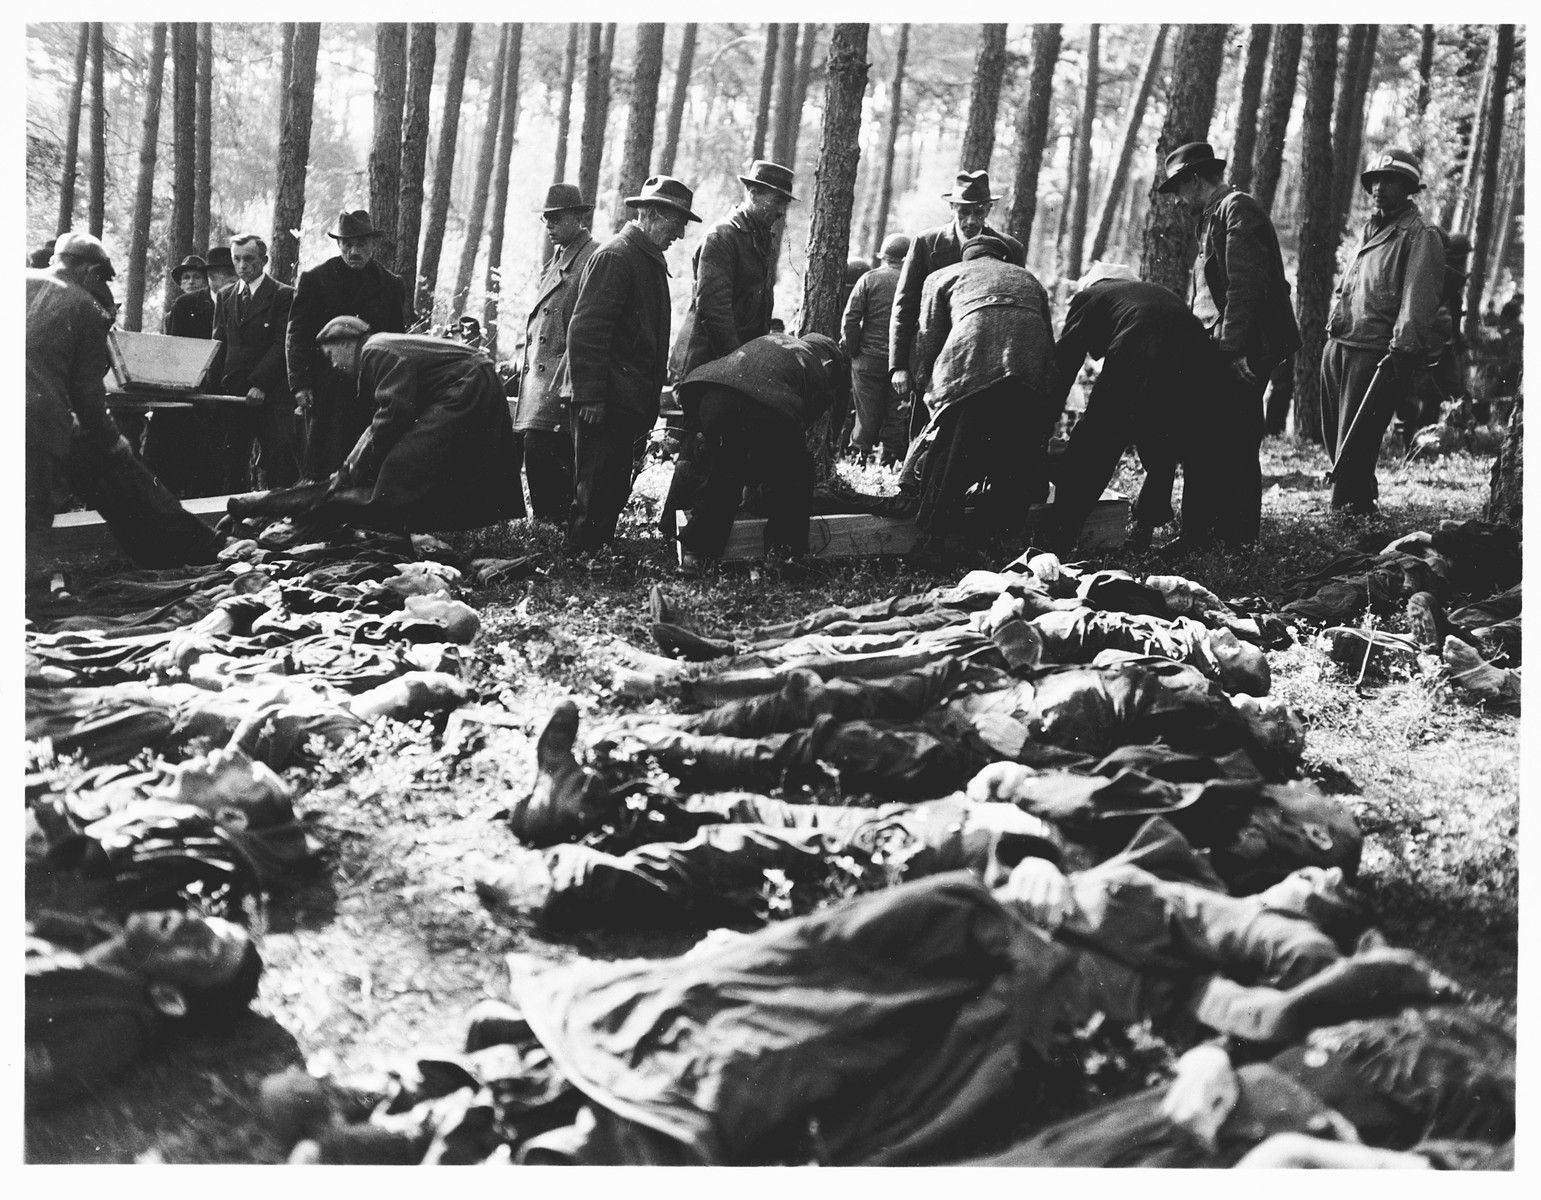 Under the supervision of American soldiers, German civilians from Neunburg vorm Wald place corpses into coffins for transportation to the town cemetery where they will be properly buried.  

The victims were Polish, Hungarian, and Russian Jews shot near Neunburg while on a death march from Flossenbuerg.